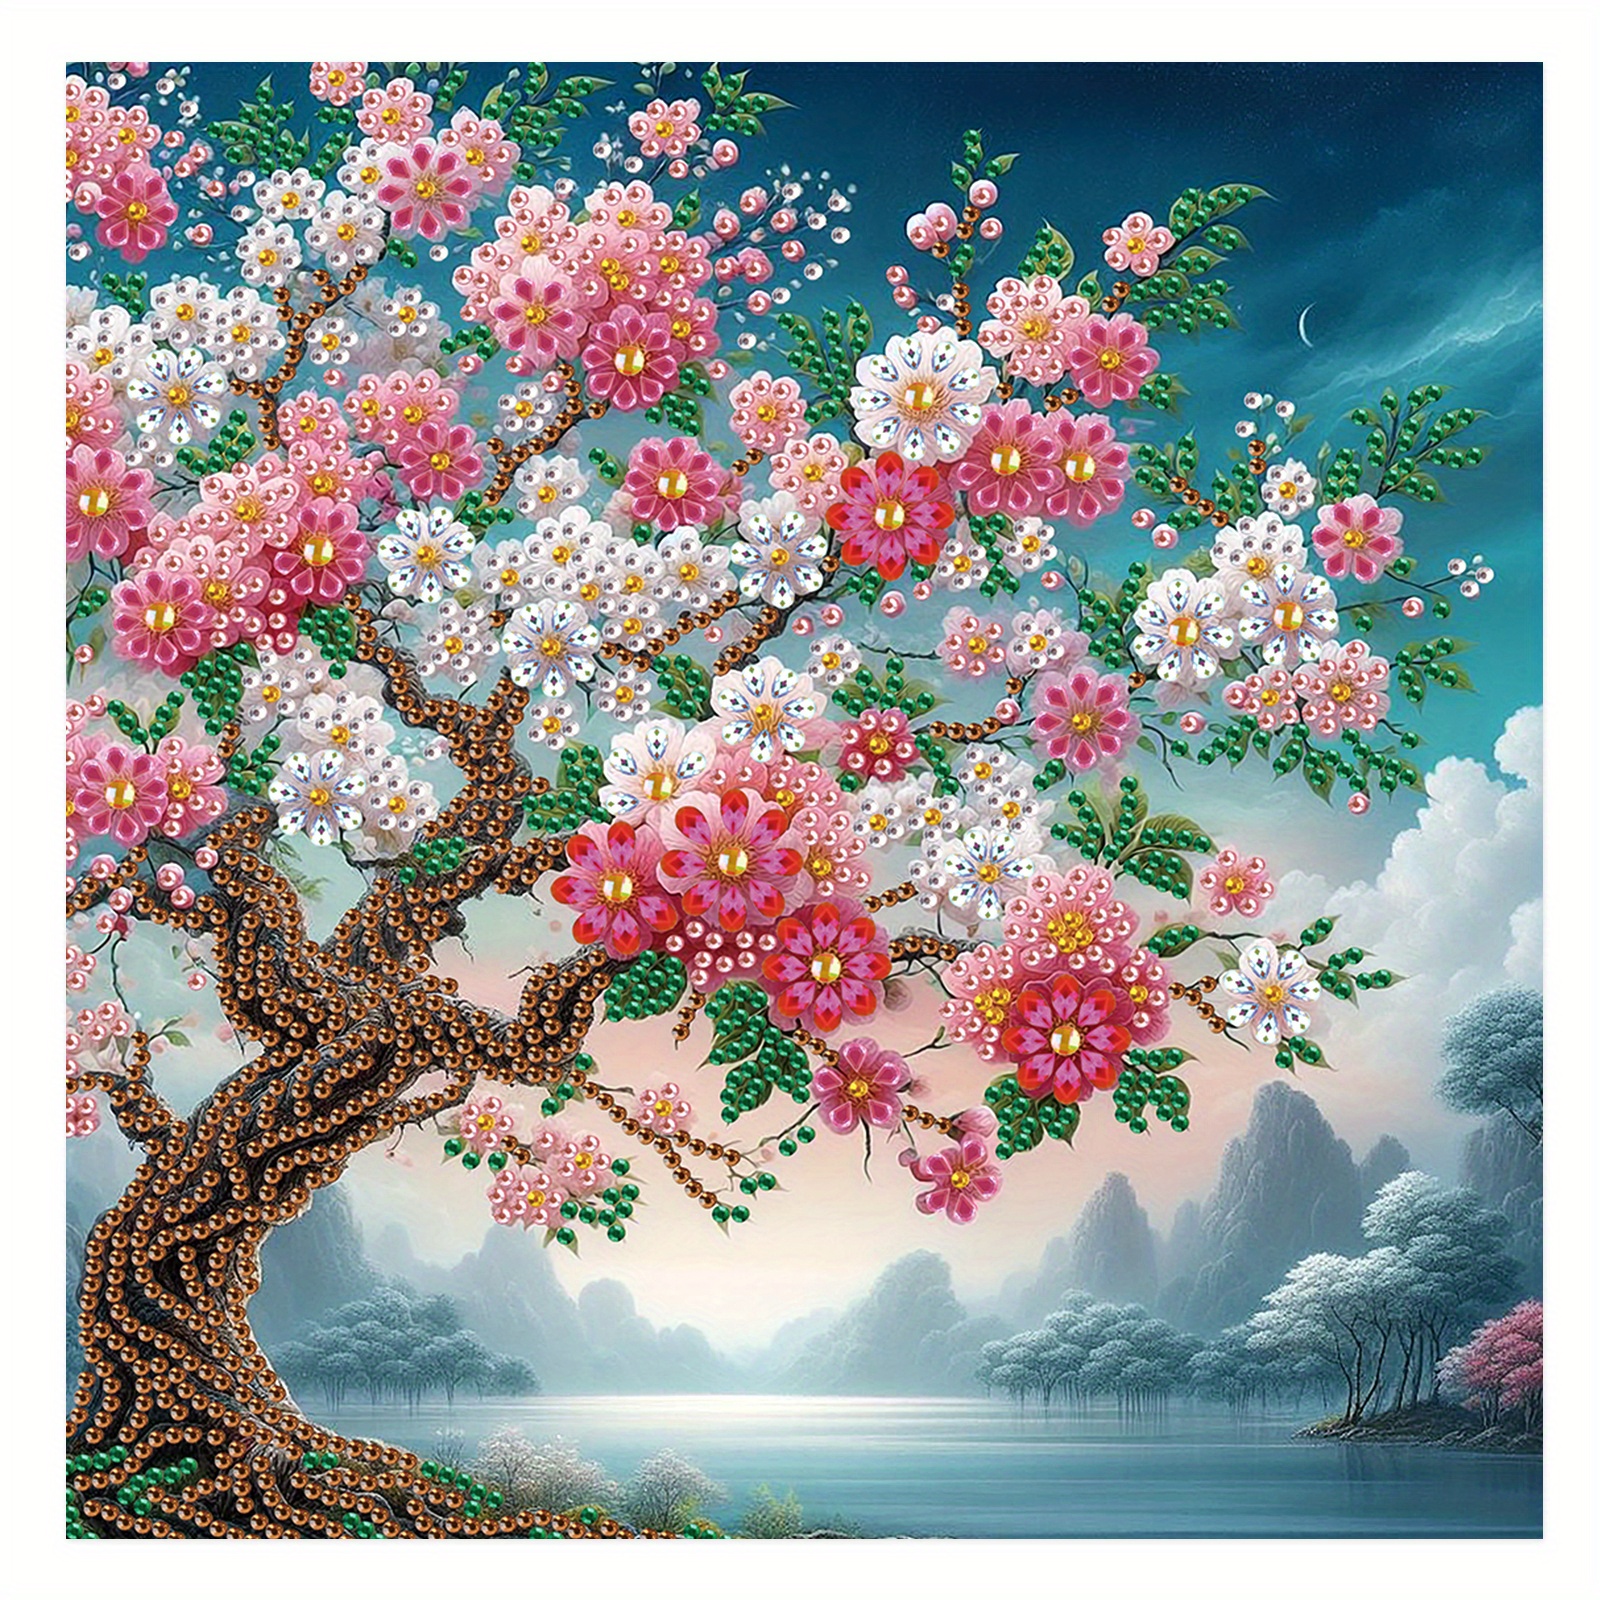 

5d Landscape Diamond Painting Kit For Adults - Special Shaped Irregular Diamonds, Canvas Art With Crystal Rhinestones, Home Wall Decor Gift, Flower Tree Scenery, 12x12 Inch